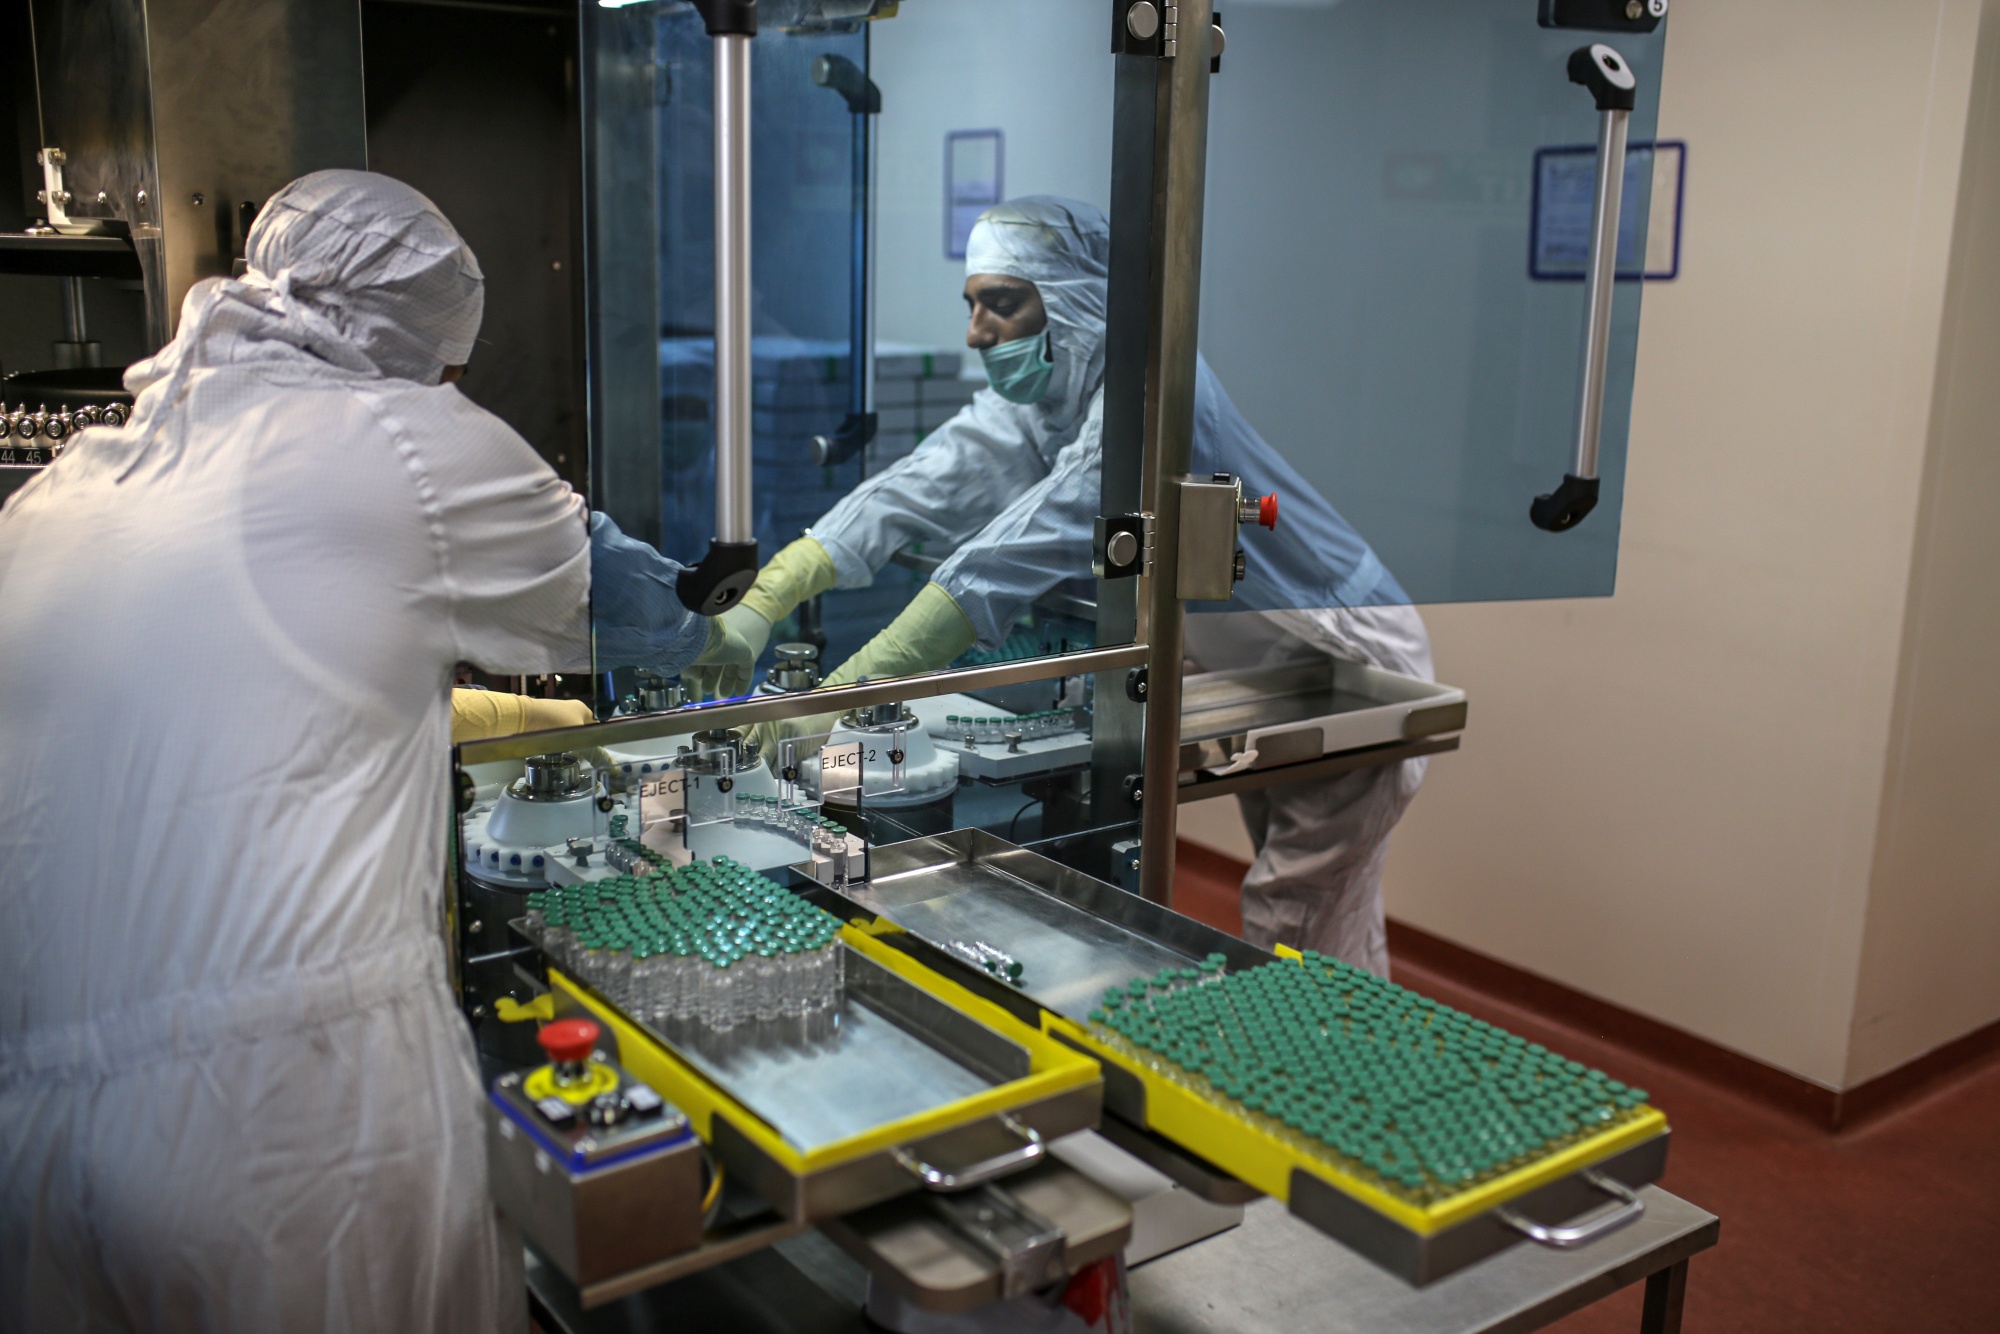 The production of line for vials of Covishield at the Serum Institute of India Ltd. Hadaspar plant in Pune, India, on Jan. 22.